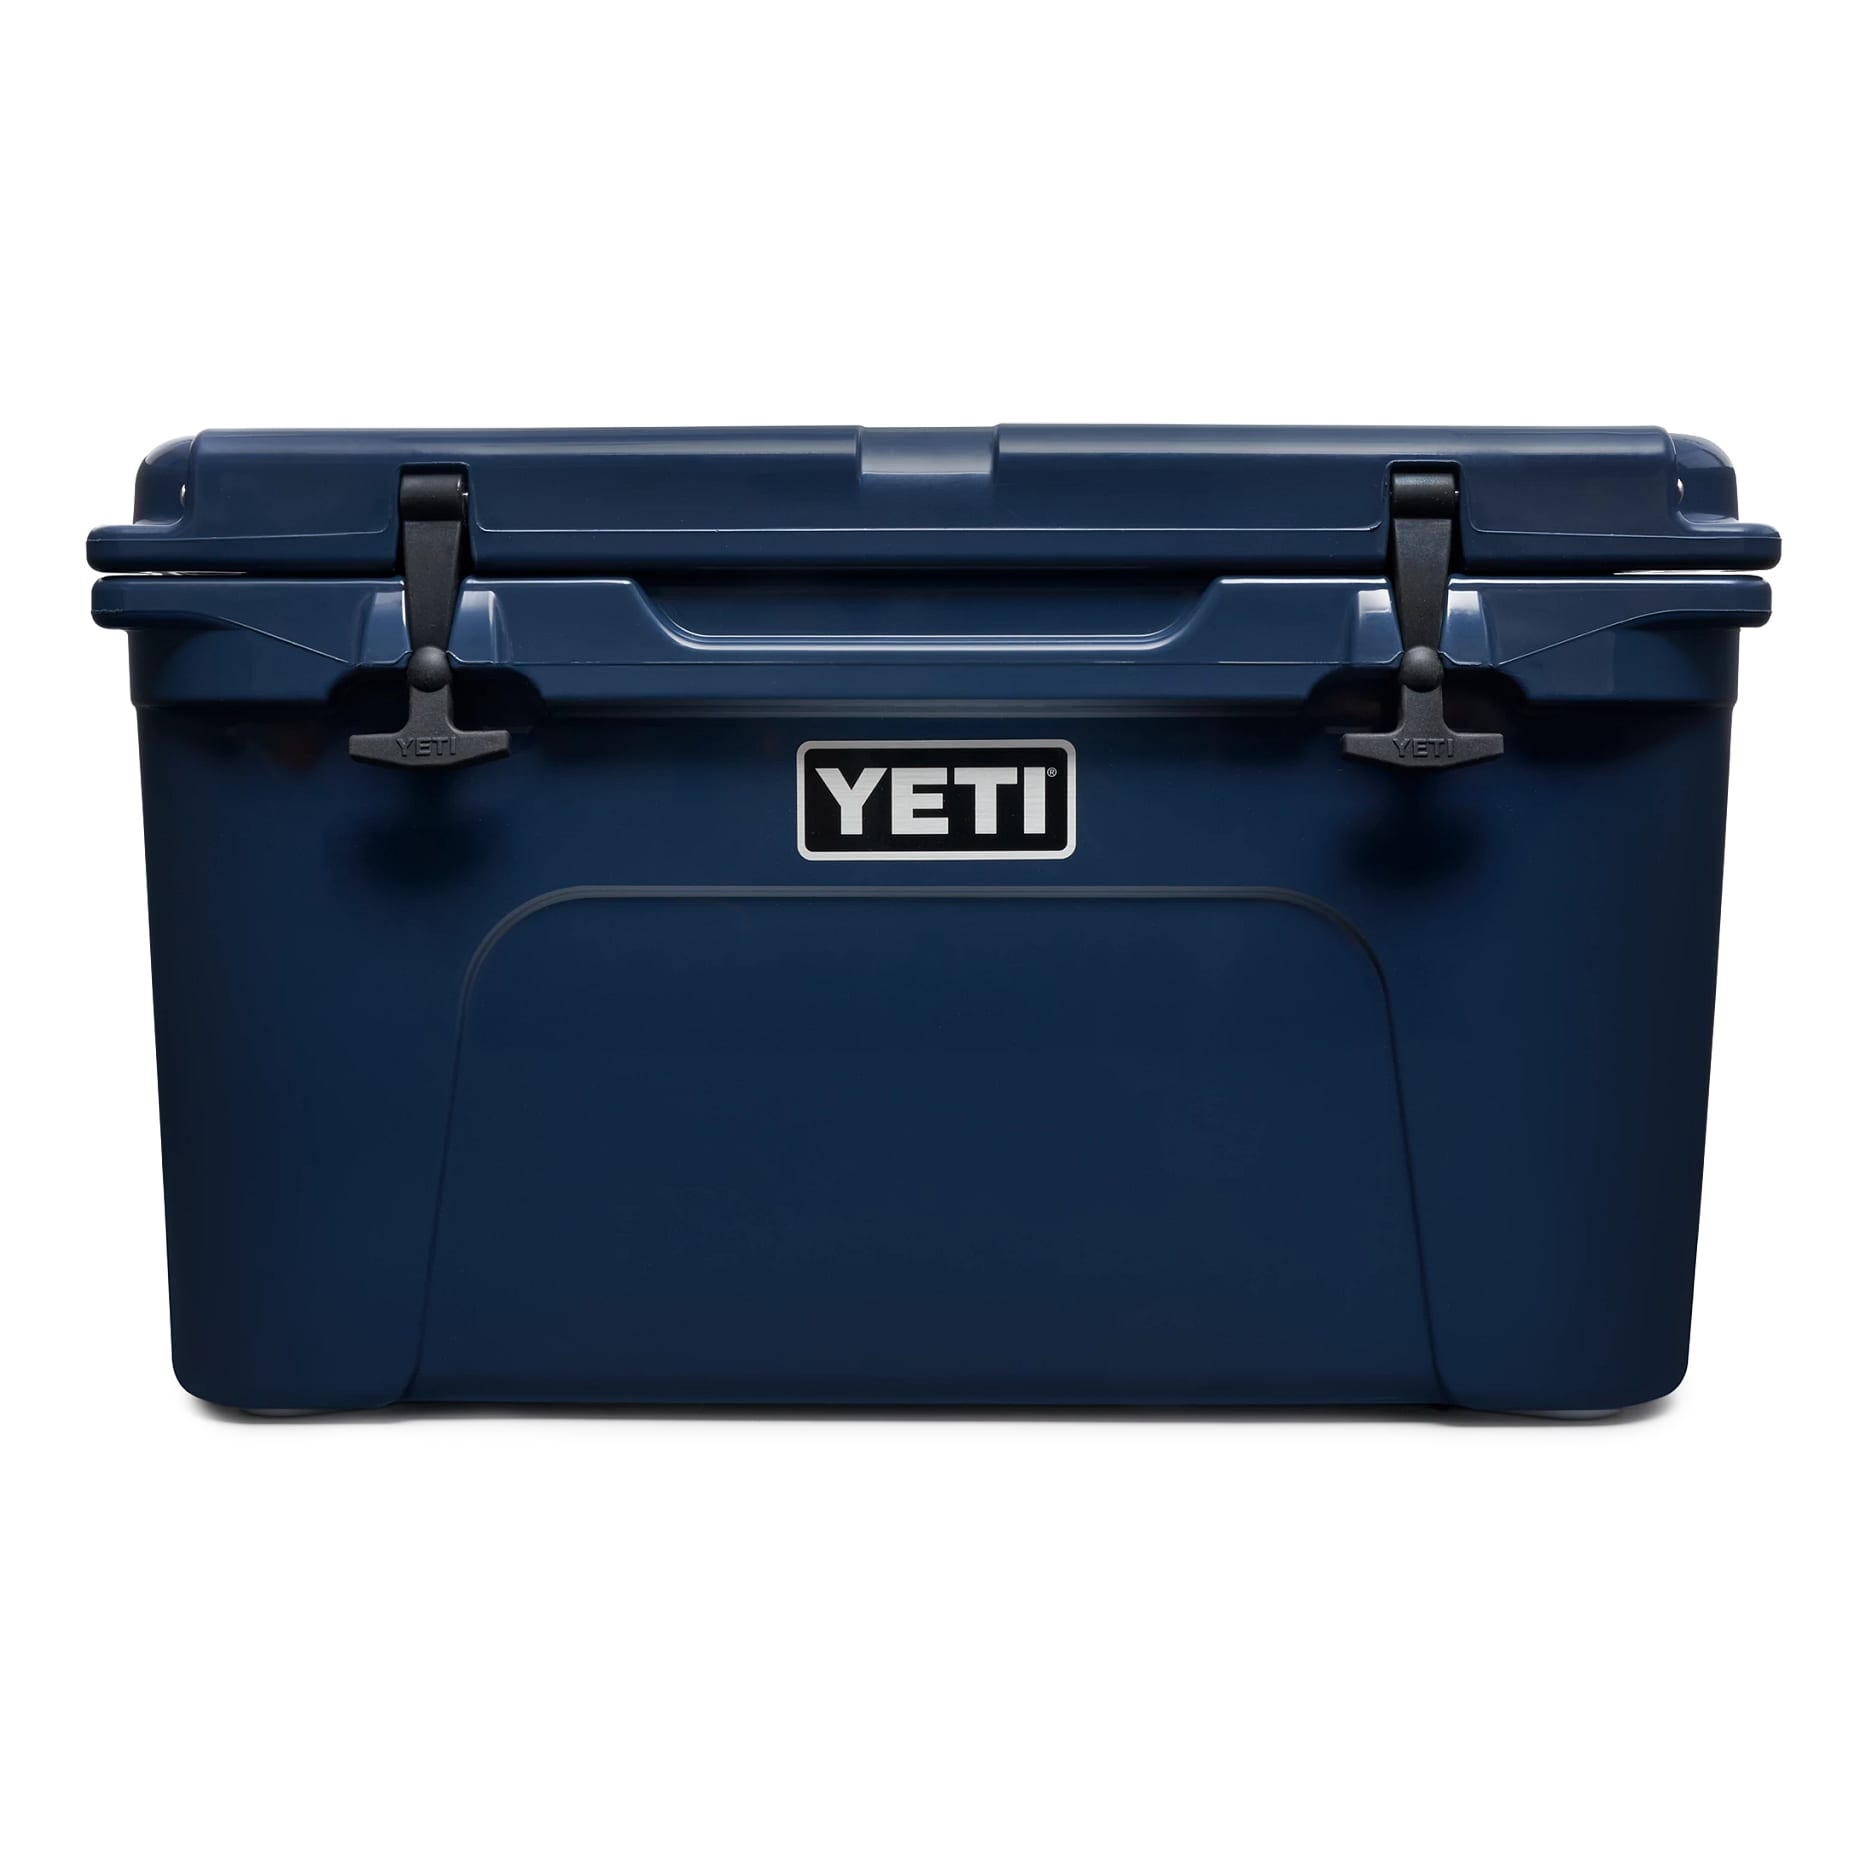 Yeti Coolers Tundra 45 Series Cooler - Navy